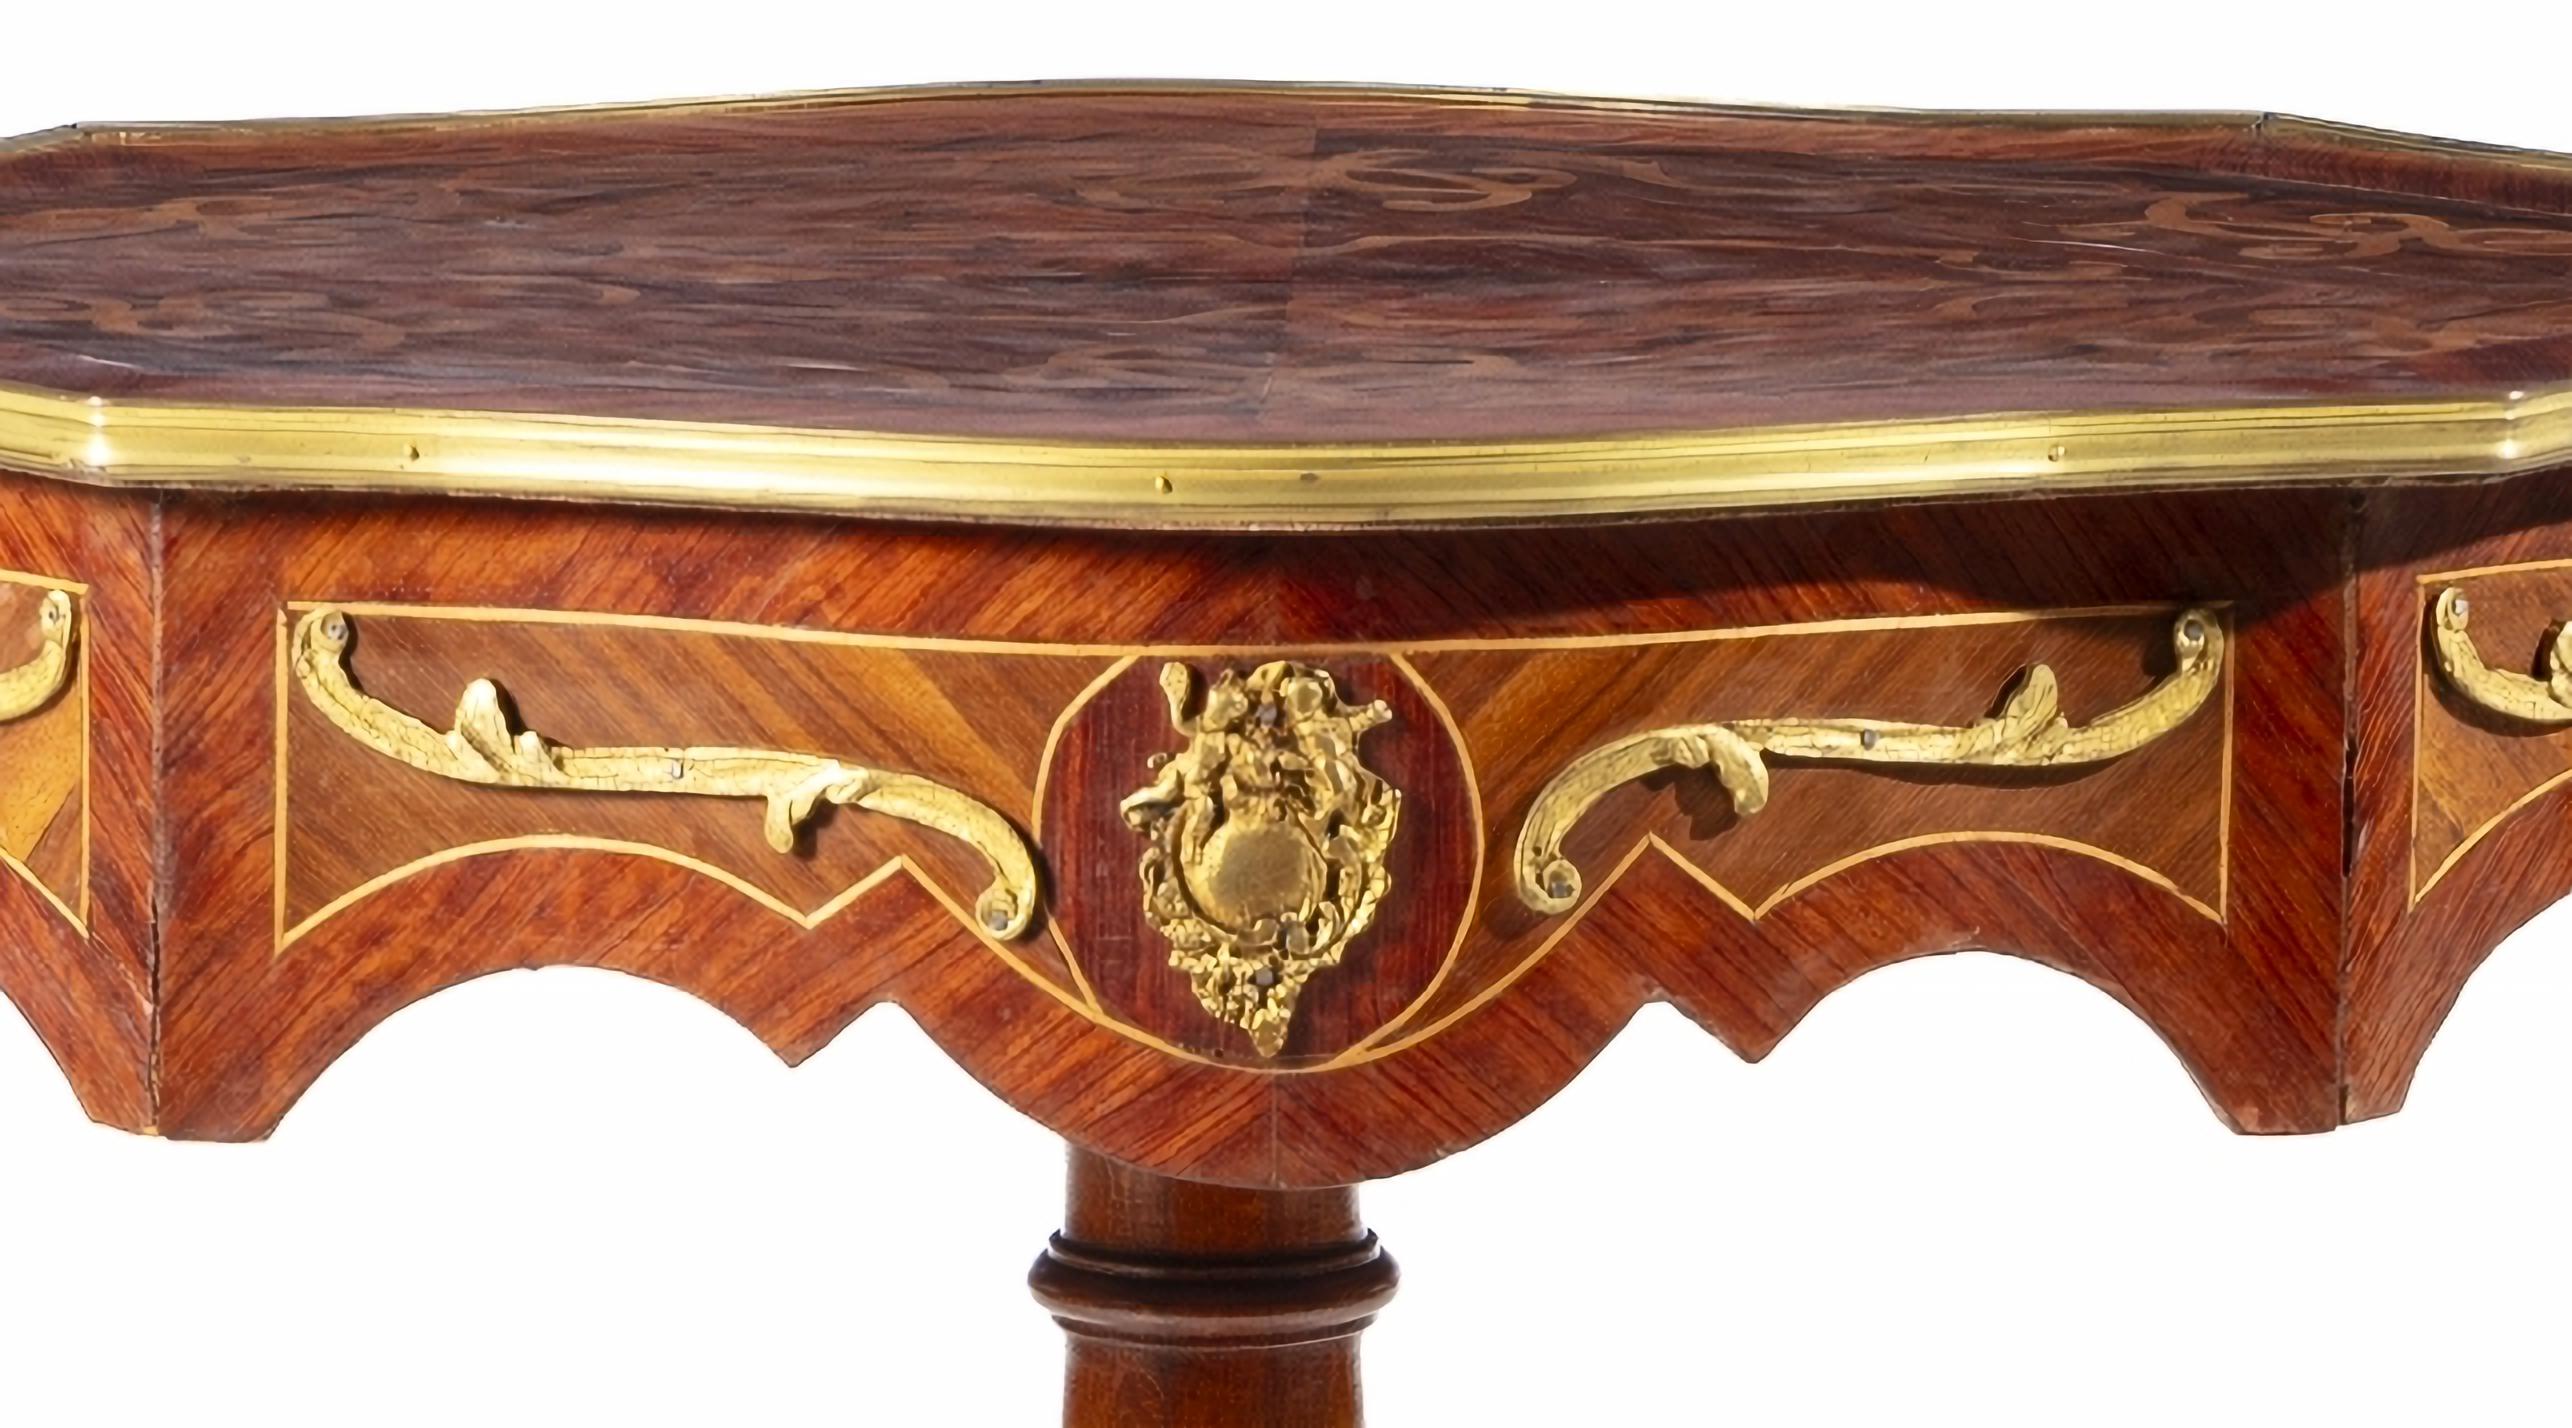 FRENCH COFFEE TABLE LOUIS XV STYLE 19th Century

veneered with various woods, decorated with plant motifs. 
applications in yellow metal.
Dim.: 79 x 80 x 60 cm
good conditions
